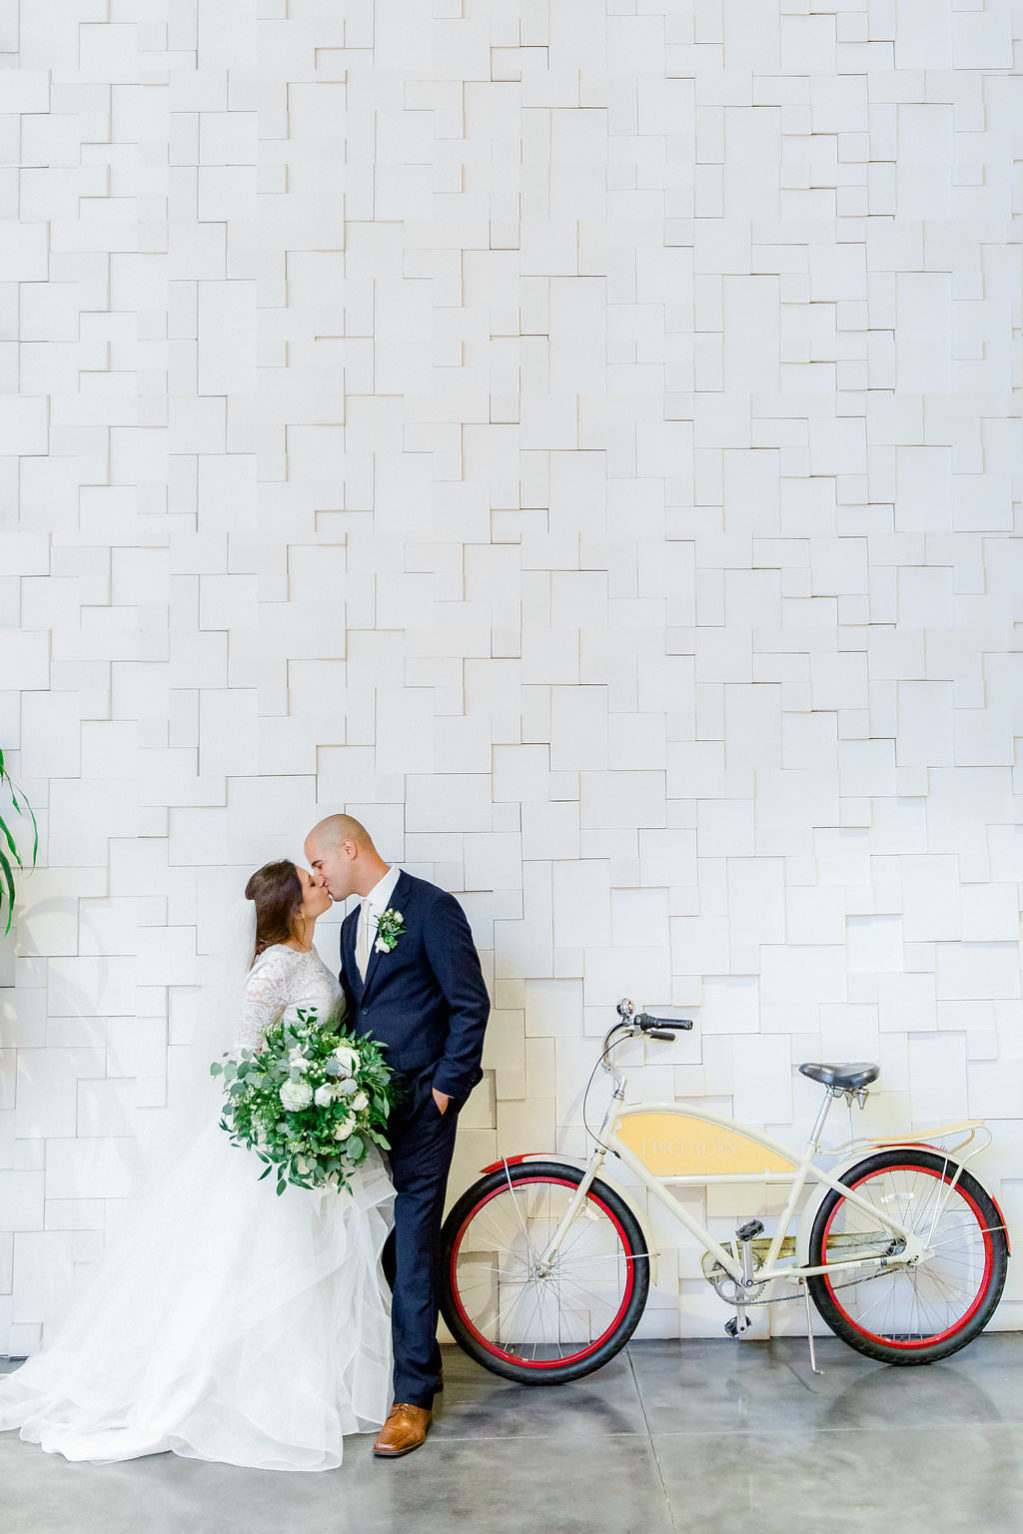 Tampa Bay Bride and Groom Wedding Portrait with Bicycle | South Tampa Boutique Wedding Venue the Epicurean Hotel